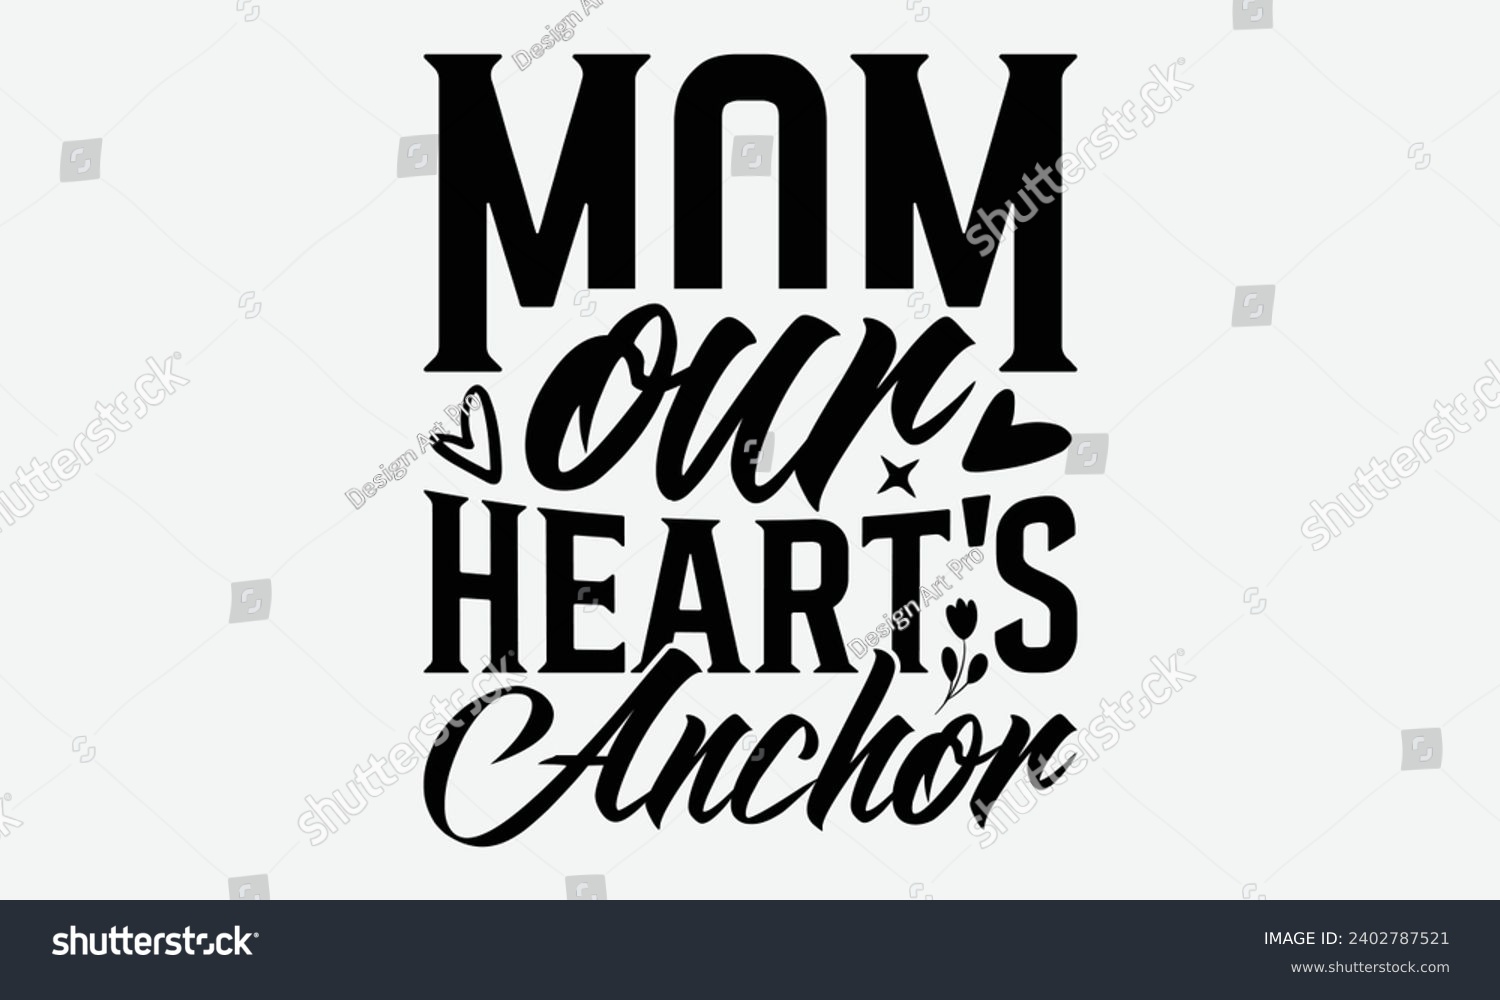 SVG of Mom Our Heart's Anchor -Mother's Day t-Shirt Designs, Take Your Dream Seriously, It's Never Too Late To Start Something New,  Calligraphy Motivational Good Quotes, For Mug , Hoodie, Wall, Banner, Flye svg